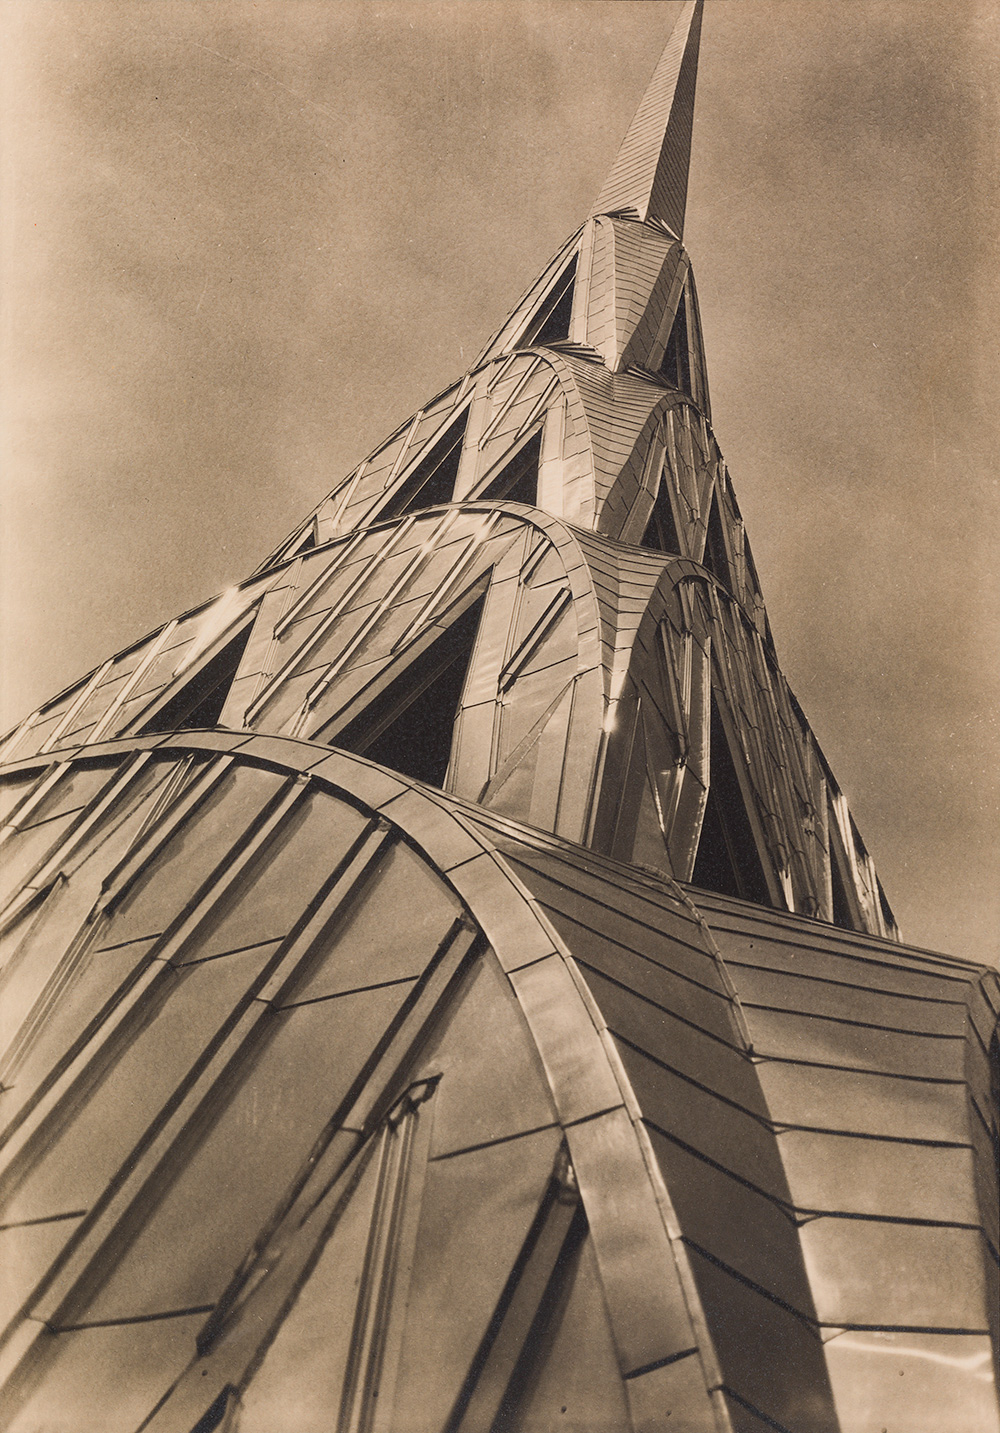 Margaret Bourke-White, "Chrysler Building: Tower," 1930. Gelatin Silver print, 5 3/8 x 3 7/8 in. (13.8 x 9.7 cm). San Francisco Museum of modern Art, Collection of the Sack Photographic Trust, ST1998.0071. Photograph by Don Ross © Estate of Margaret Bourke-White / Licensed by VAGA, New York, NY